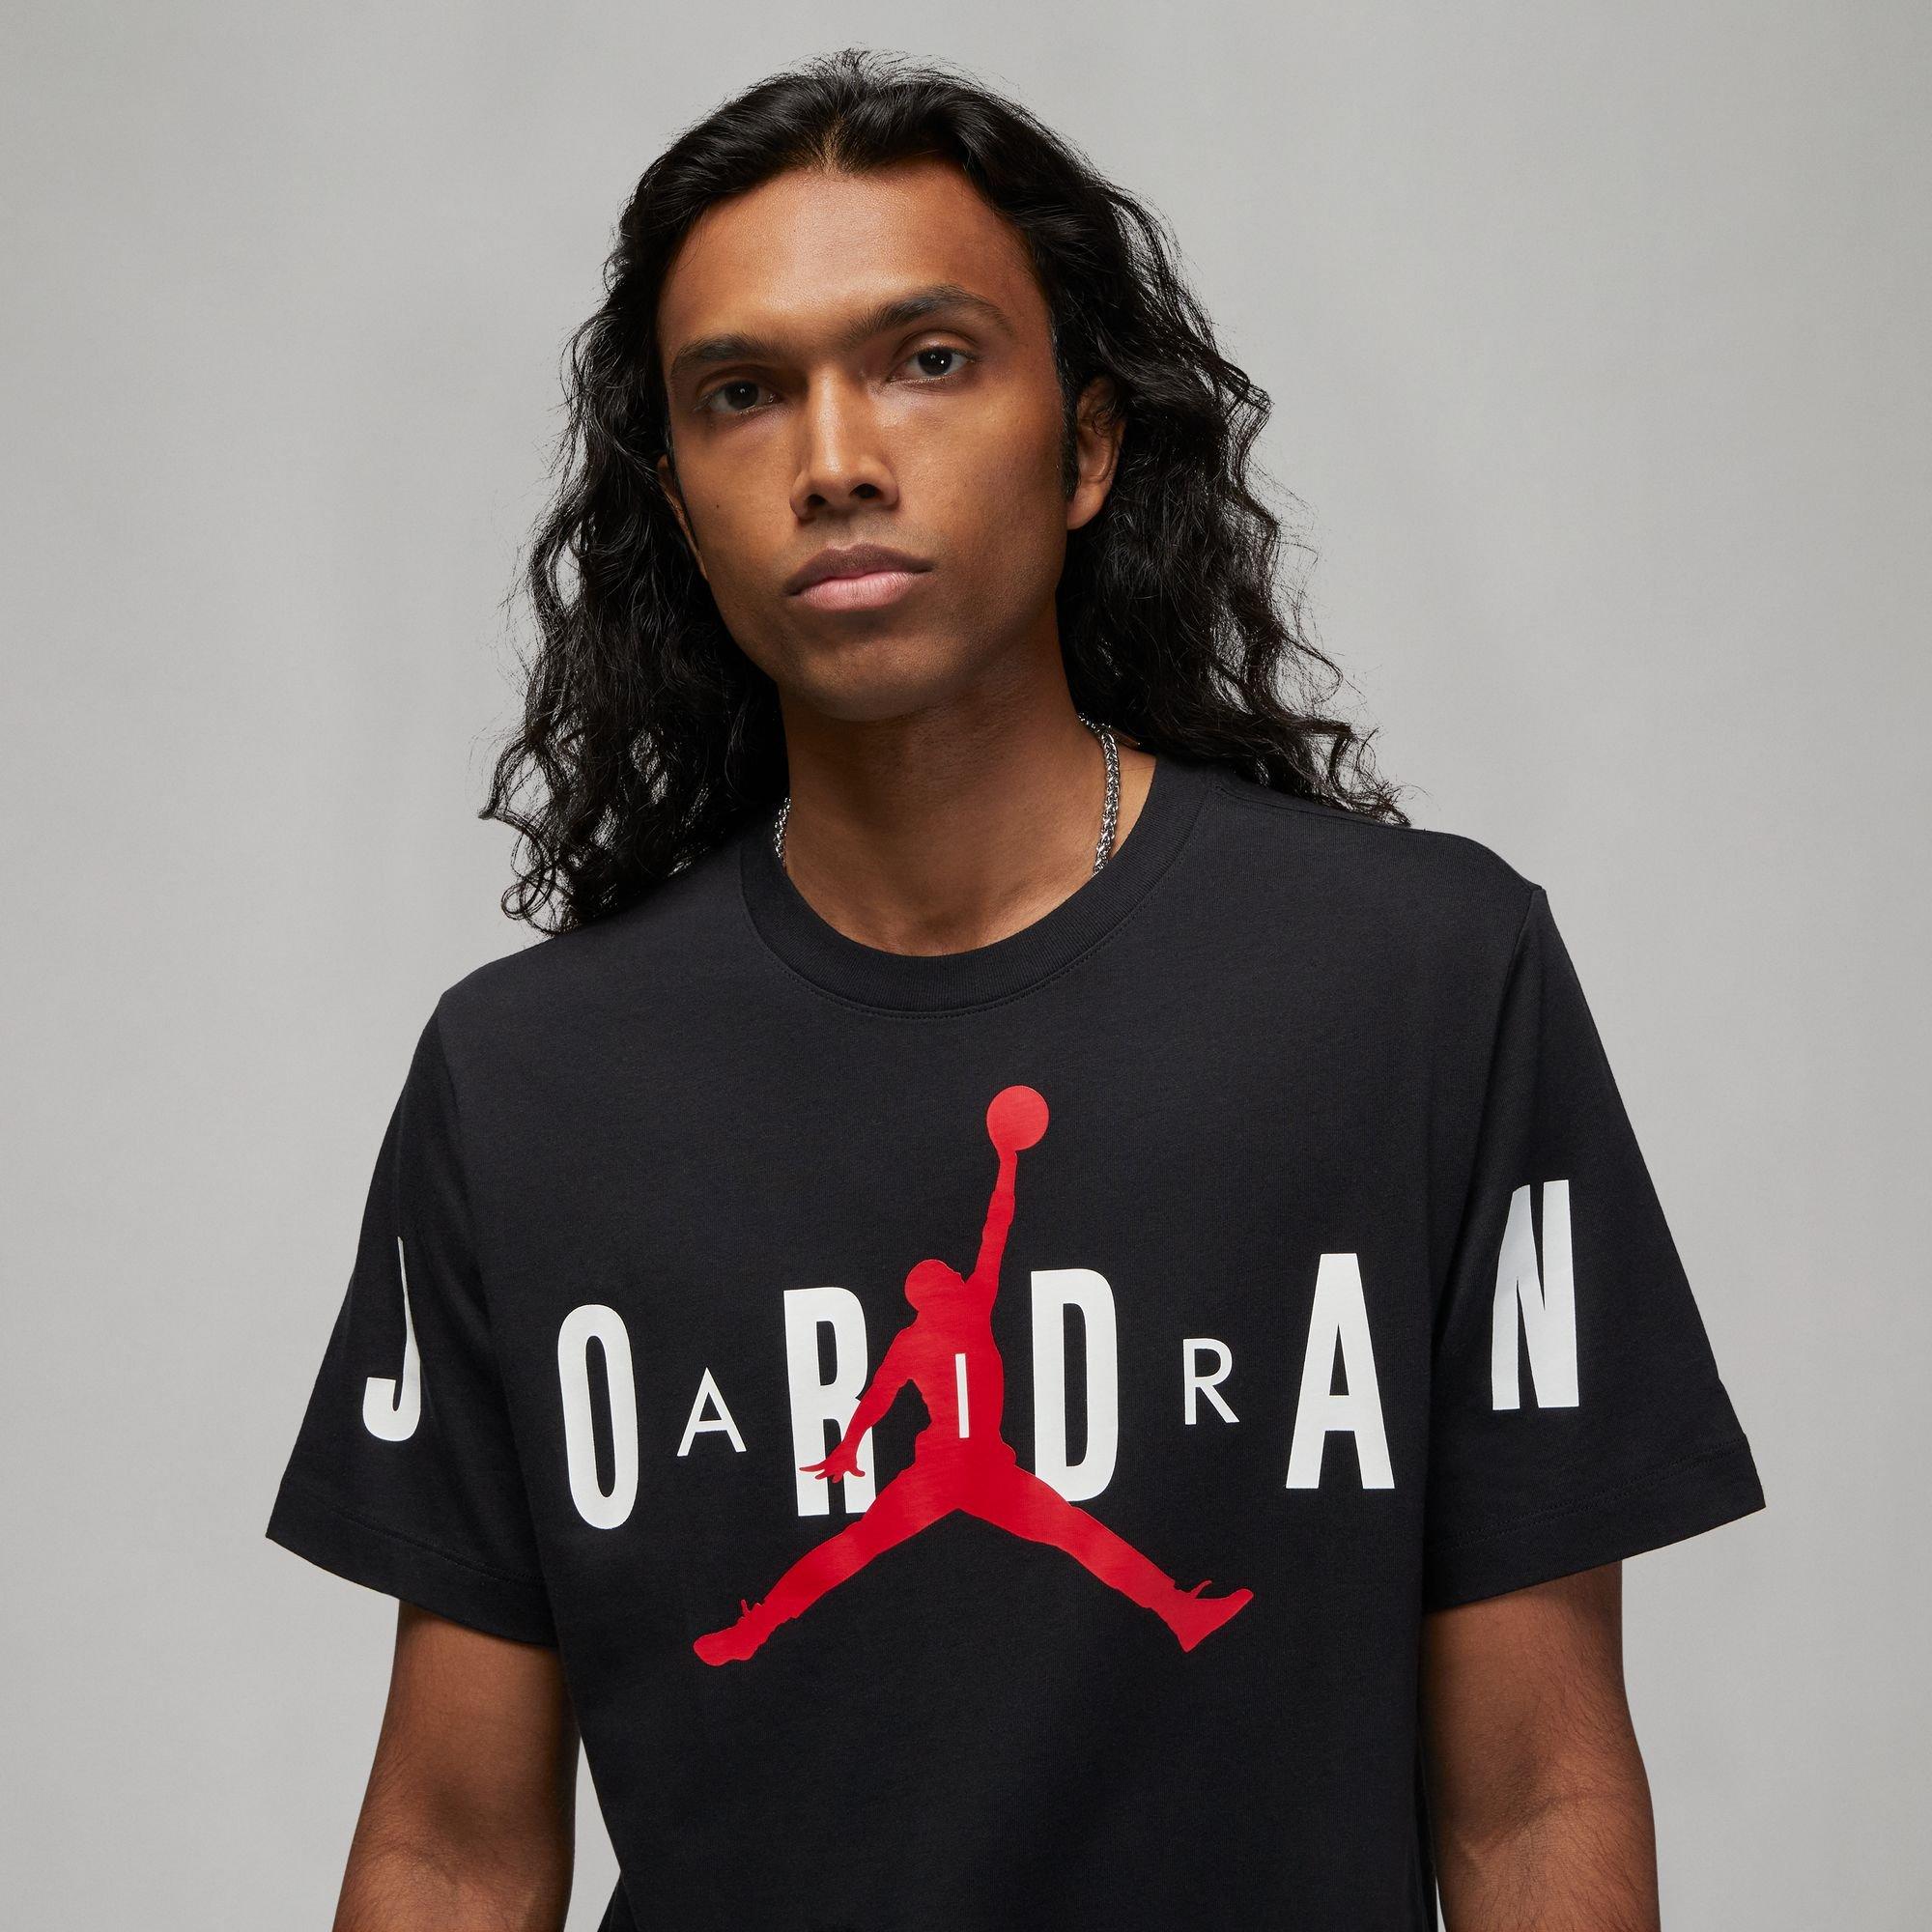 AIR JORDAN T-shirt with Patches